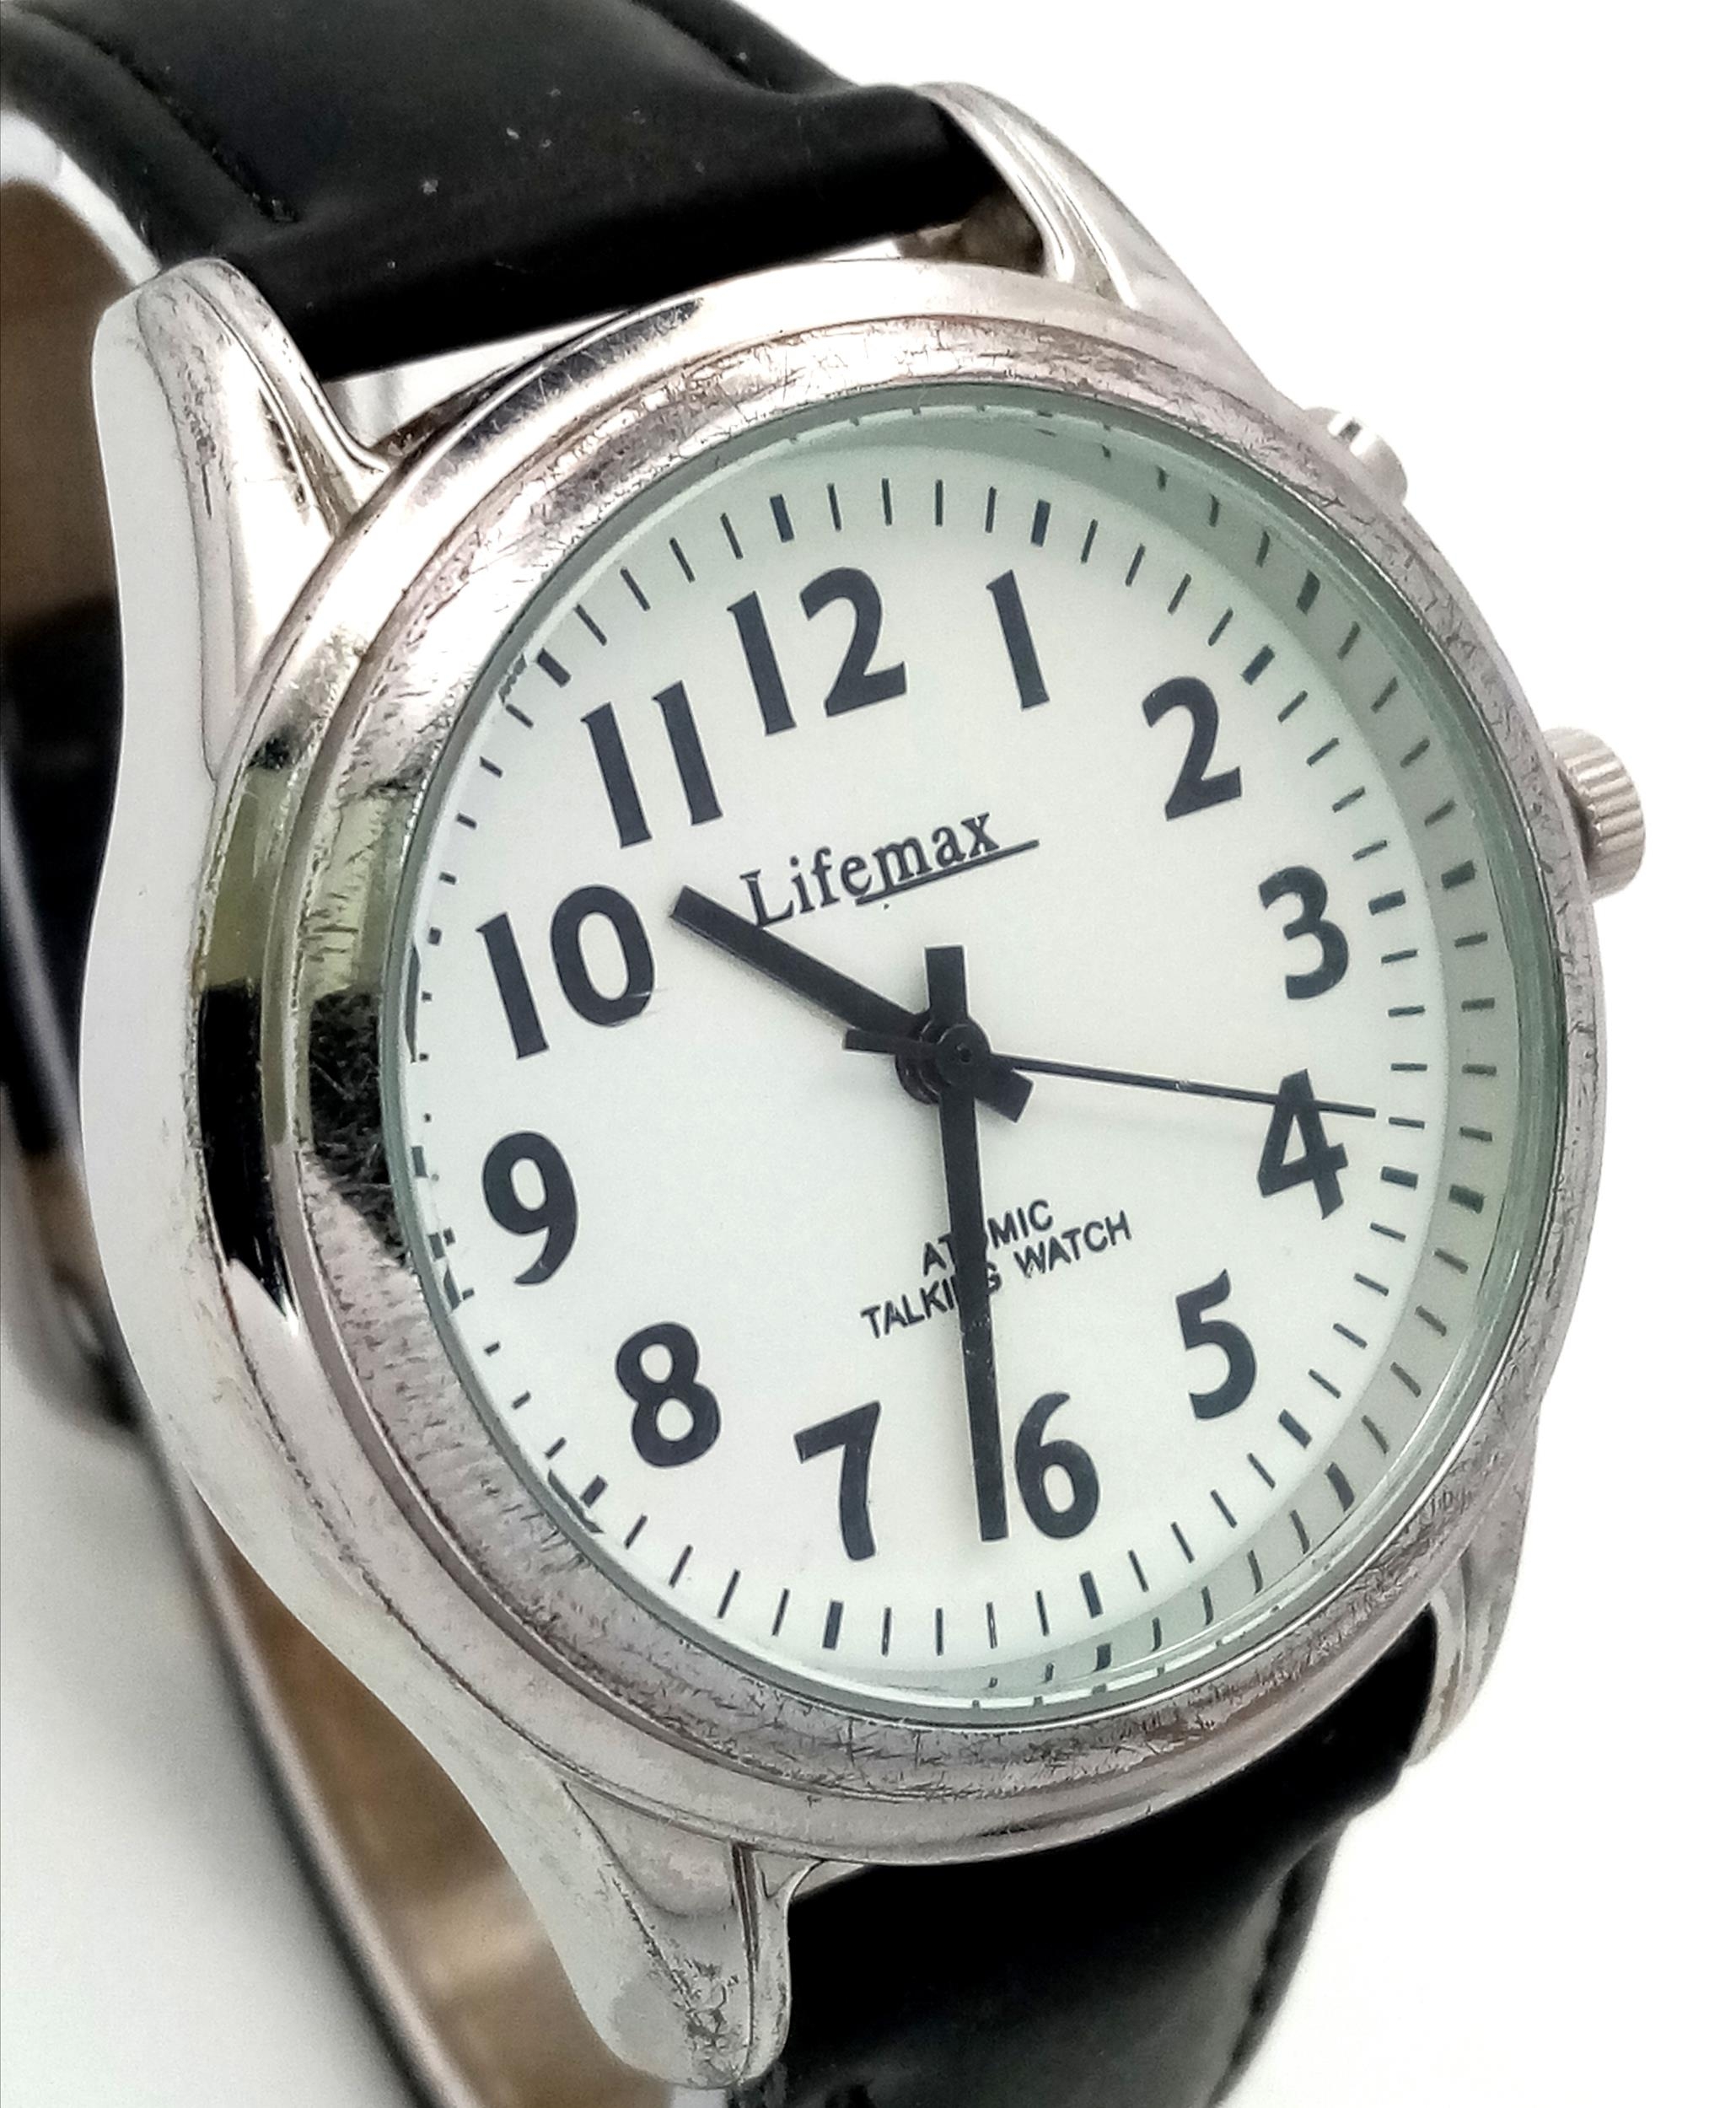 A Very Interesting and Scarce Vintage Lifemax Atomic Talking Watch with Radio Signal Updated Timing. - Image 4 of 5